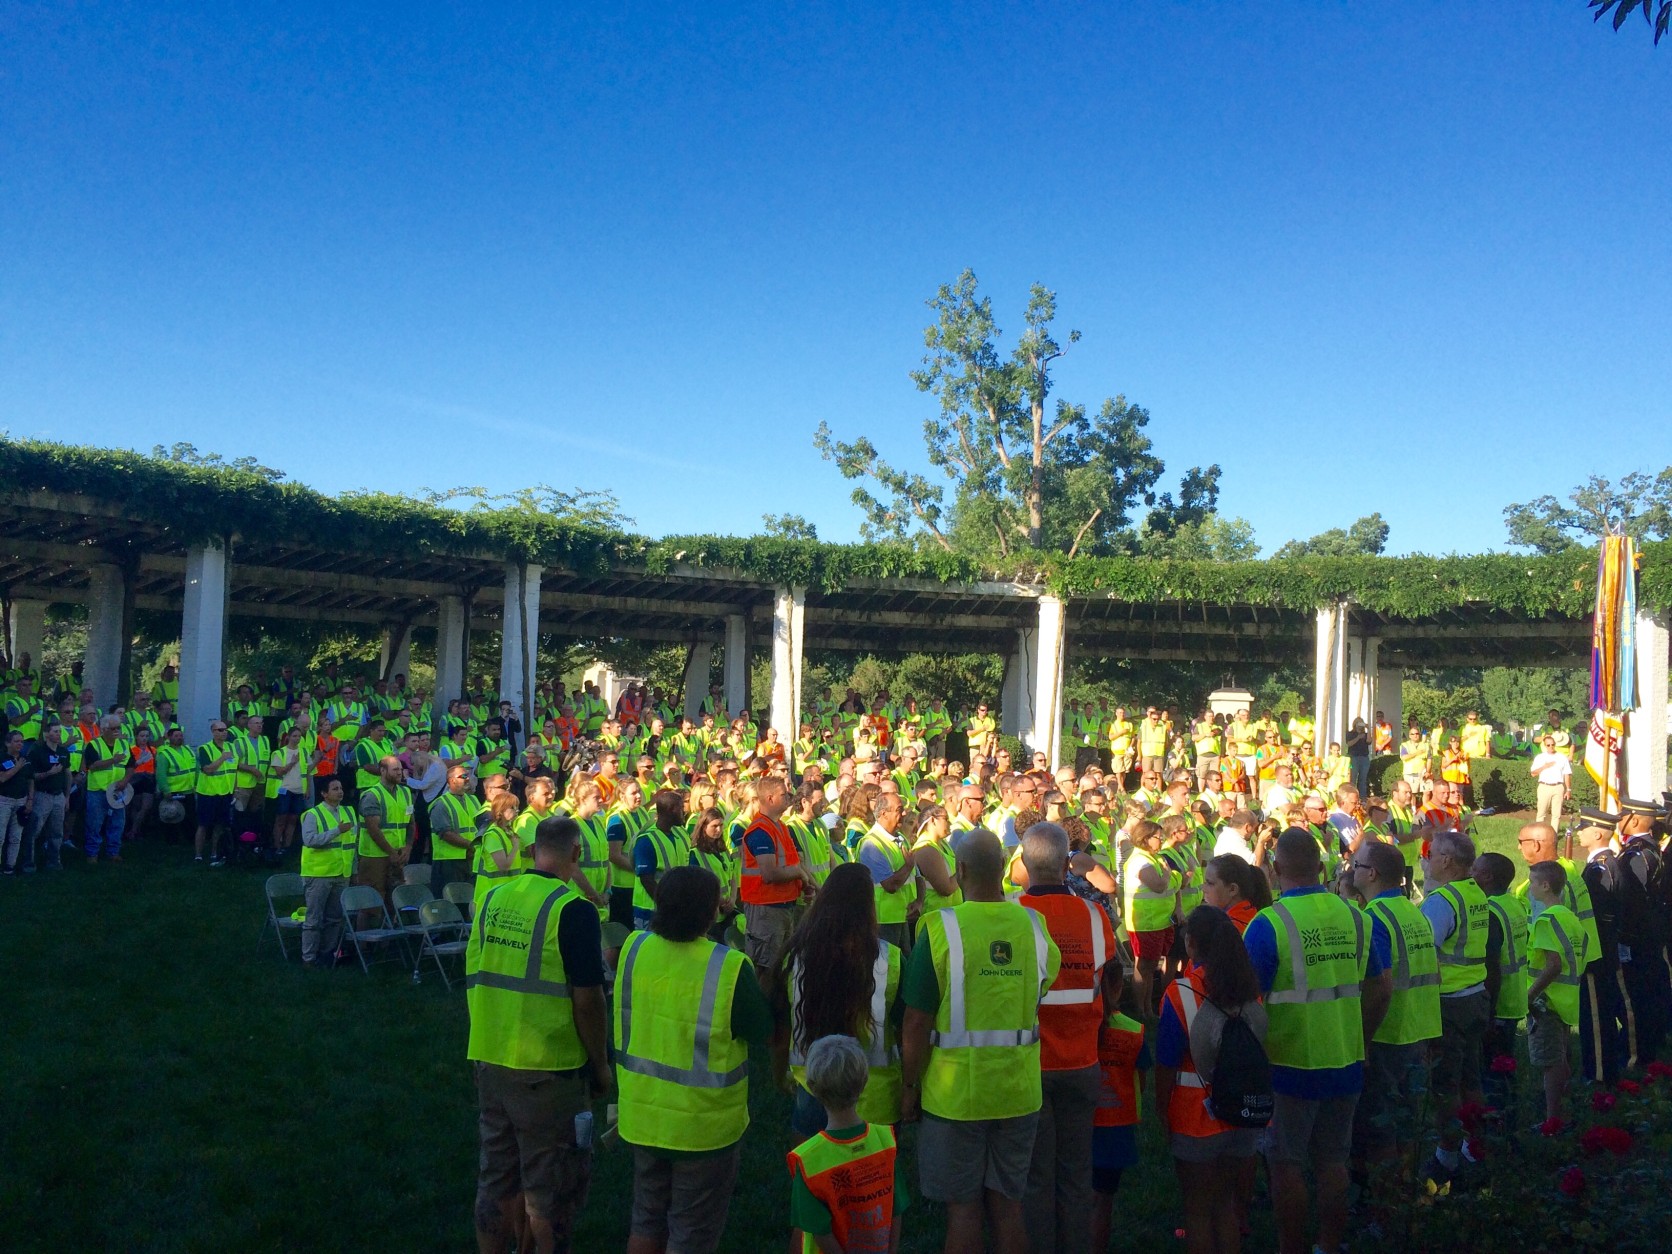 Hundreds of landscapers gather at Arlington National Cemetery to volunteer to spruce up the grounds. (WTOP/Nick Iannelli)